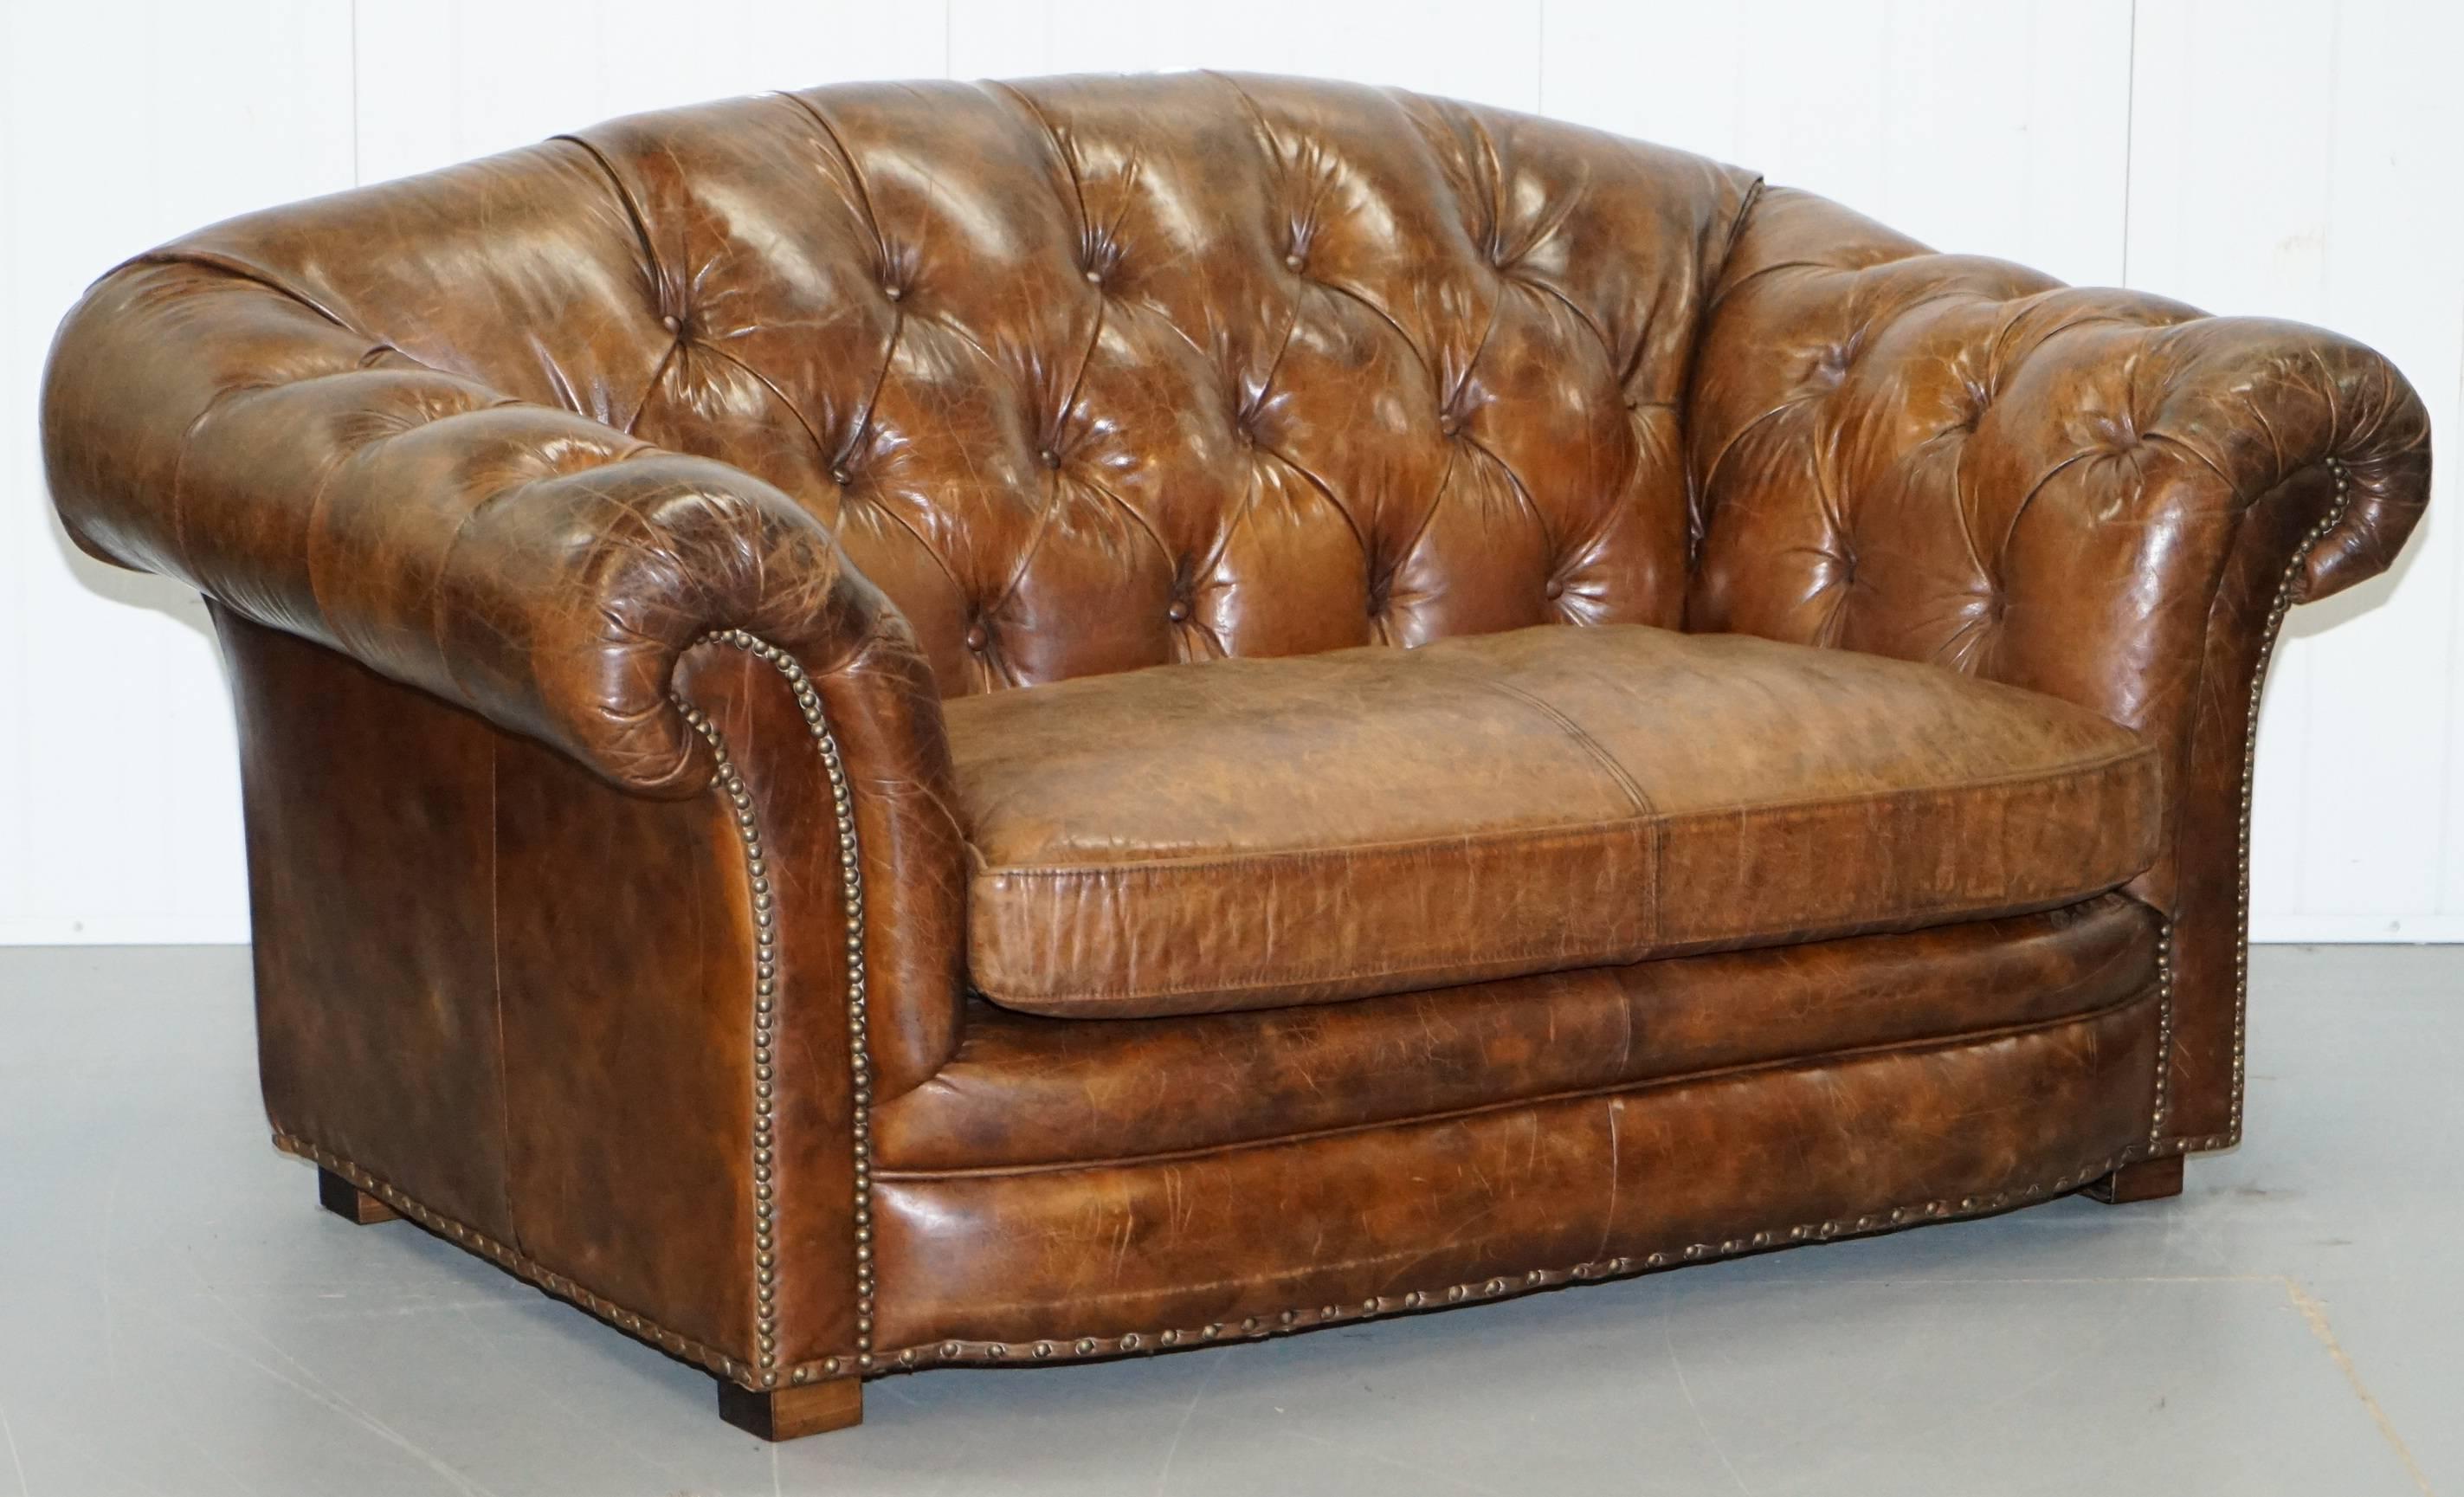 British Stunning Aged Brown Heritage Leather Two-Seat Chesterfield Sofa Nice Find